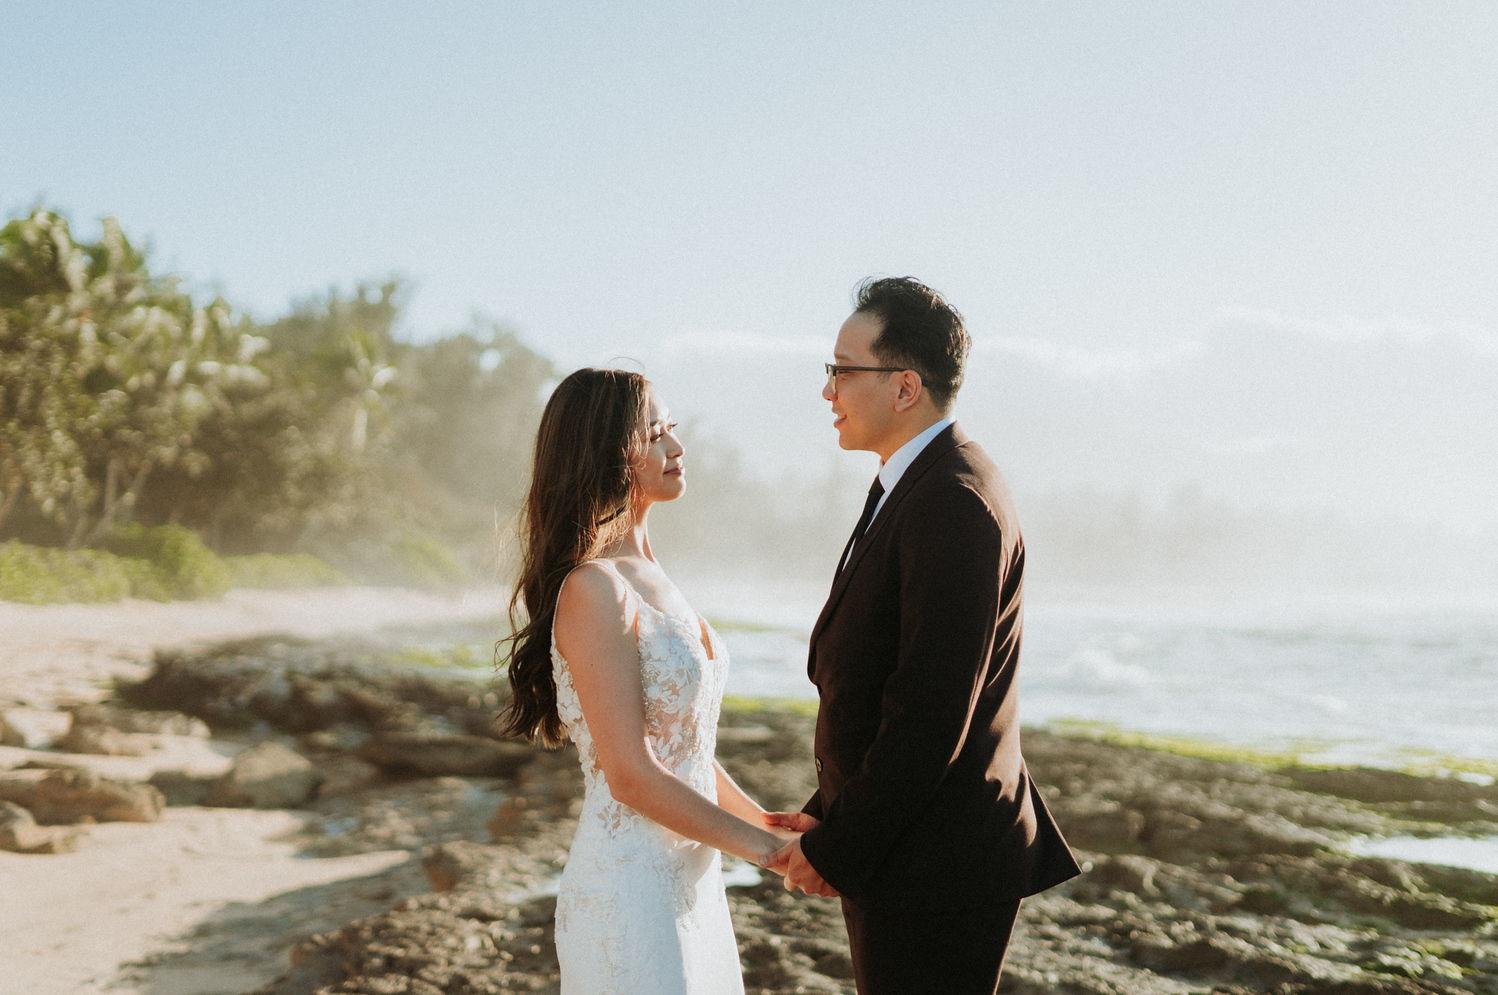 The Wedding Website of Betty Giang and Kyle Nguyen